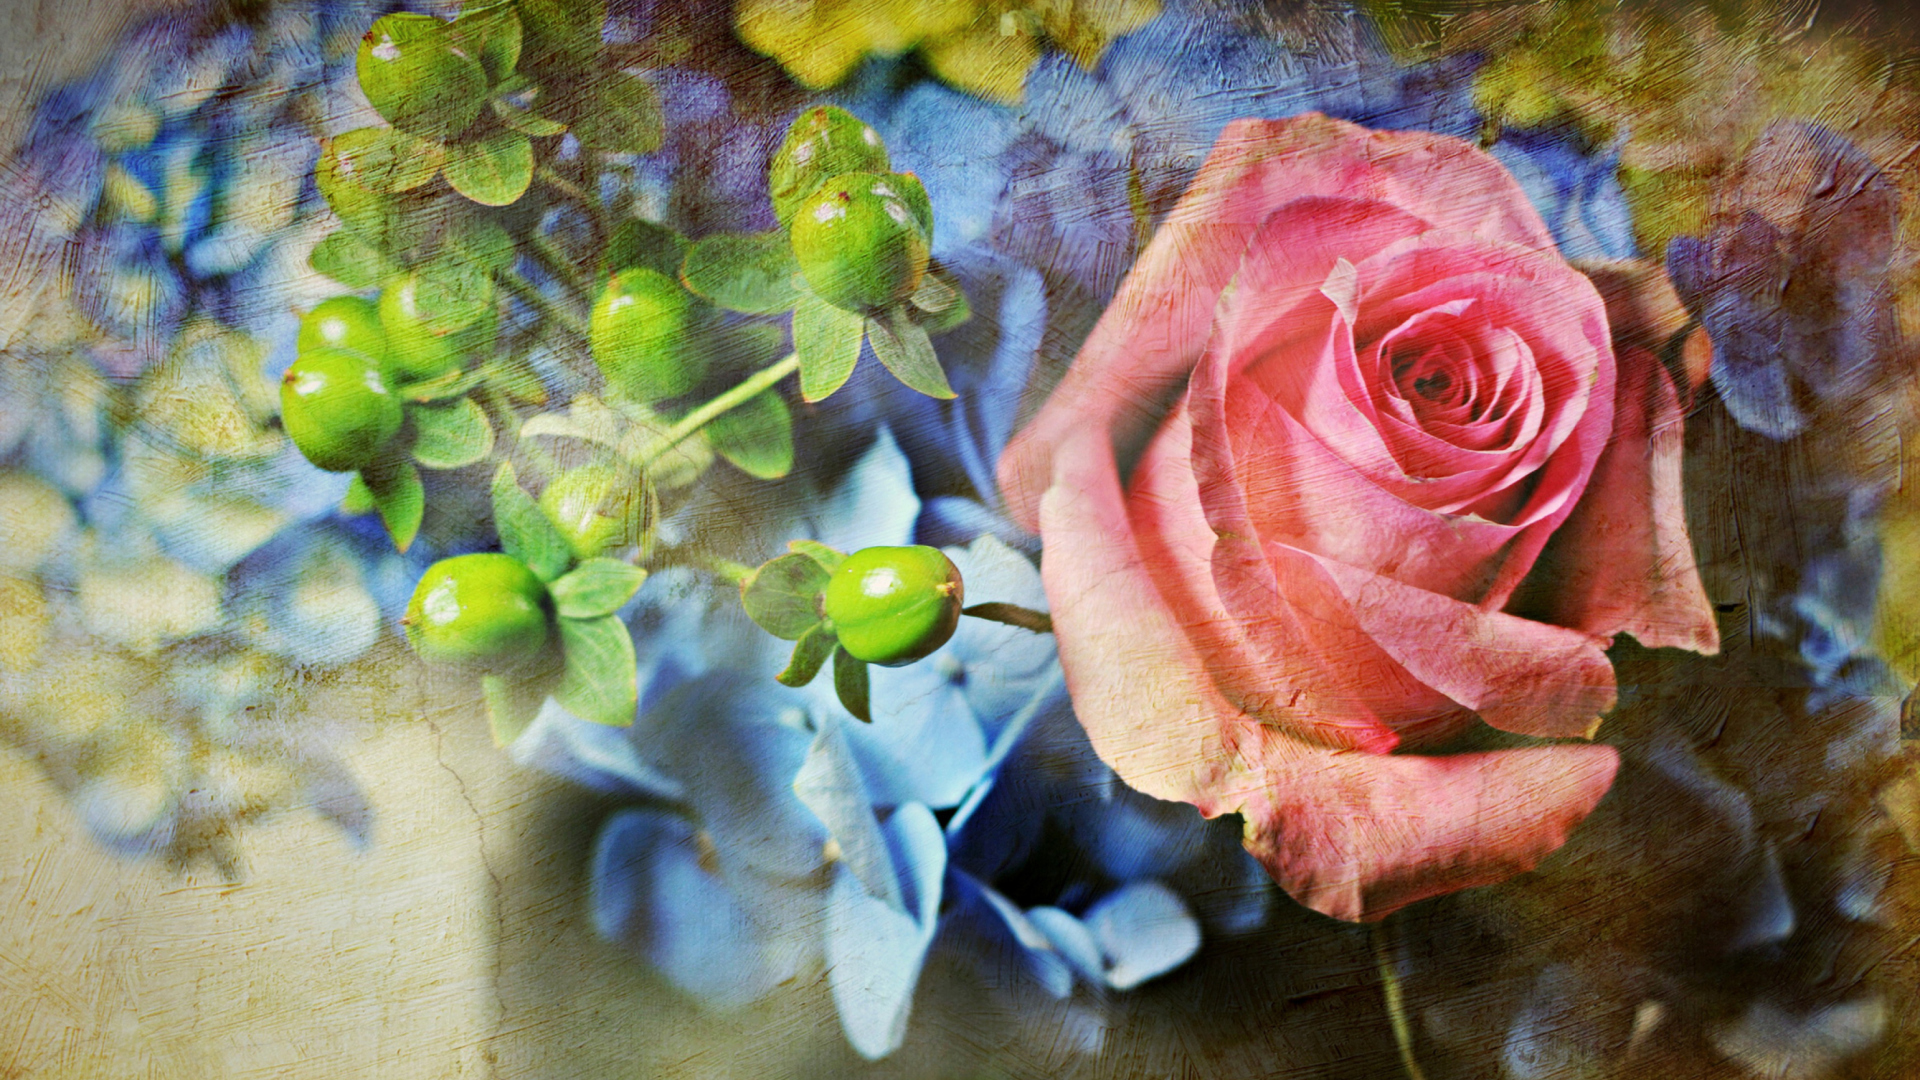 Pink Rose And Blue Flowers wallpaper 1920x1080